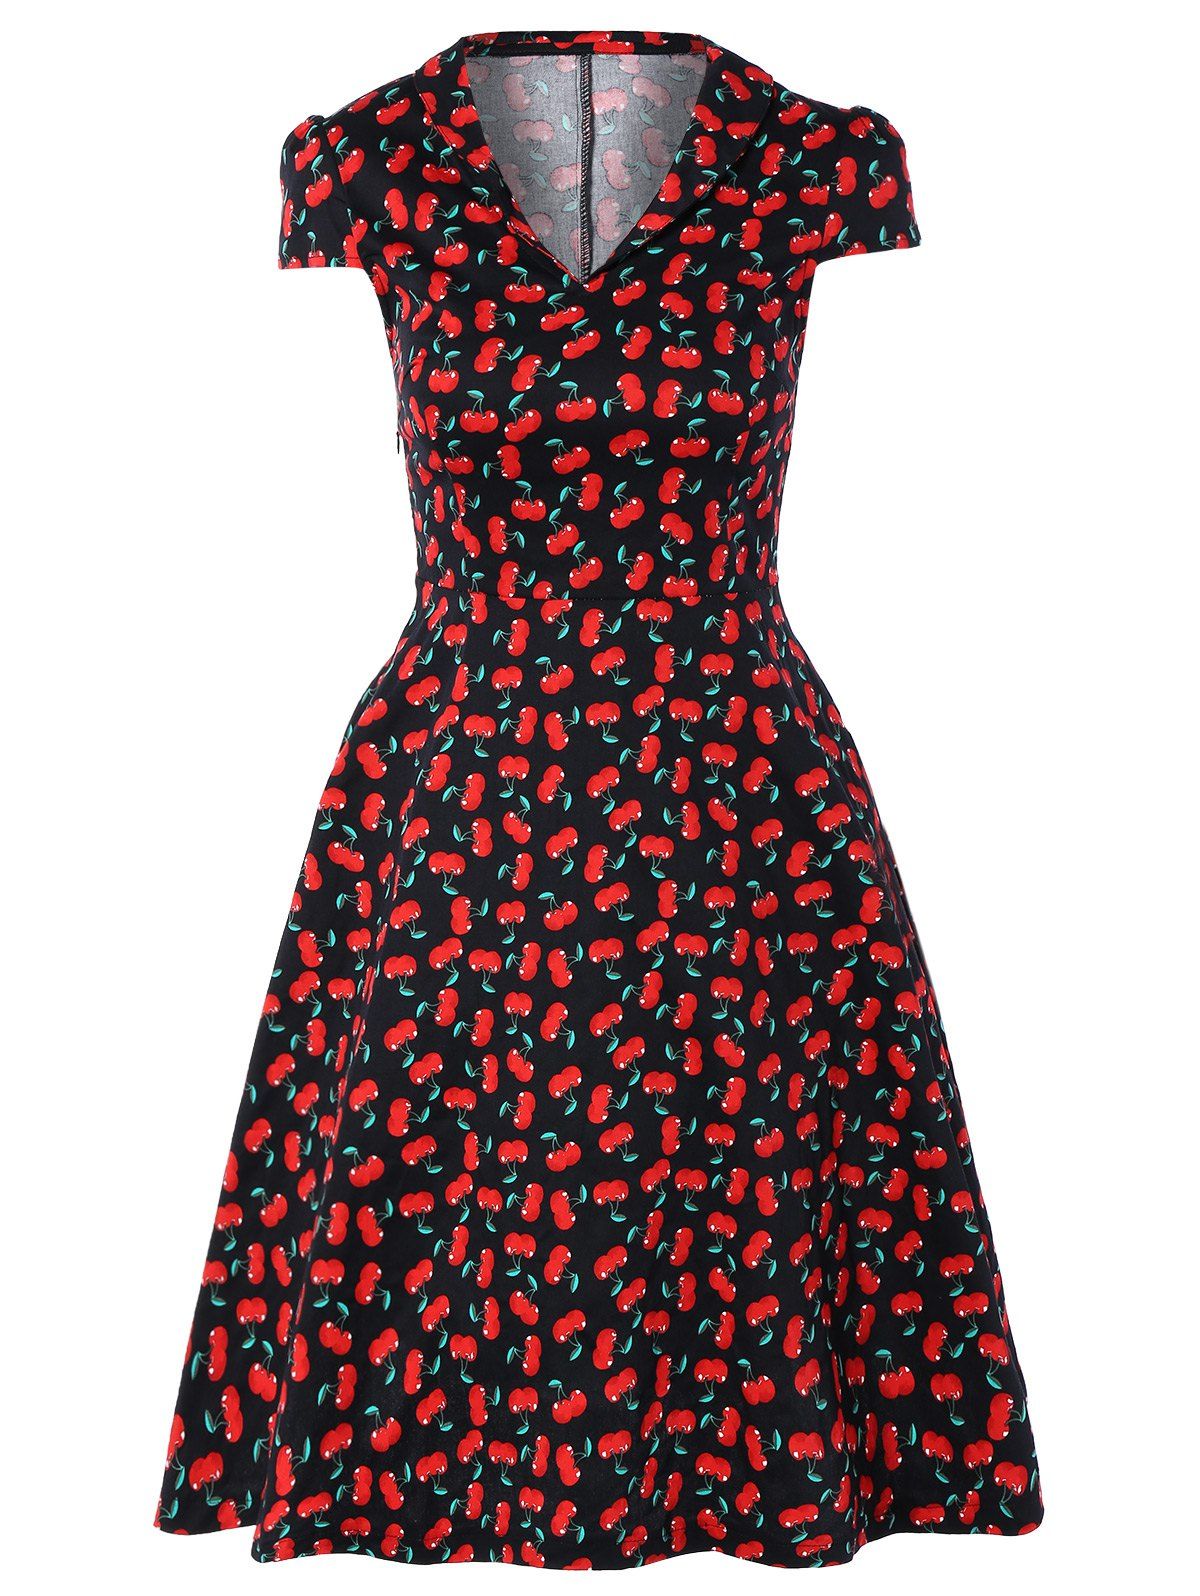 [41% OFF] 2020 Vintage V-Neck Cherry Print Fit And Flare Dress In BLACK ...